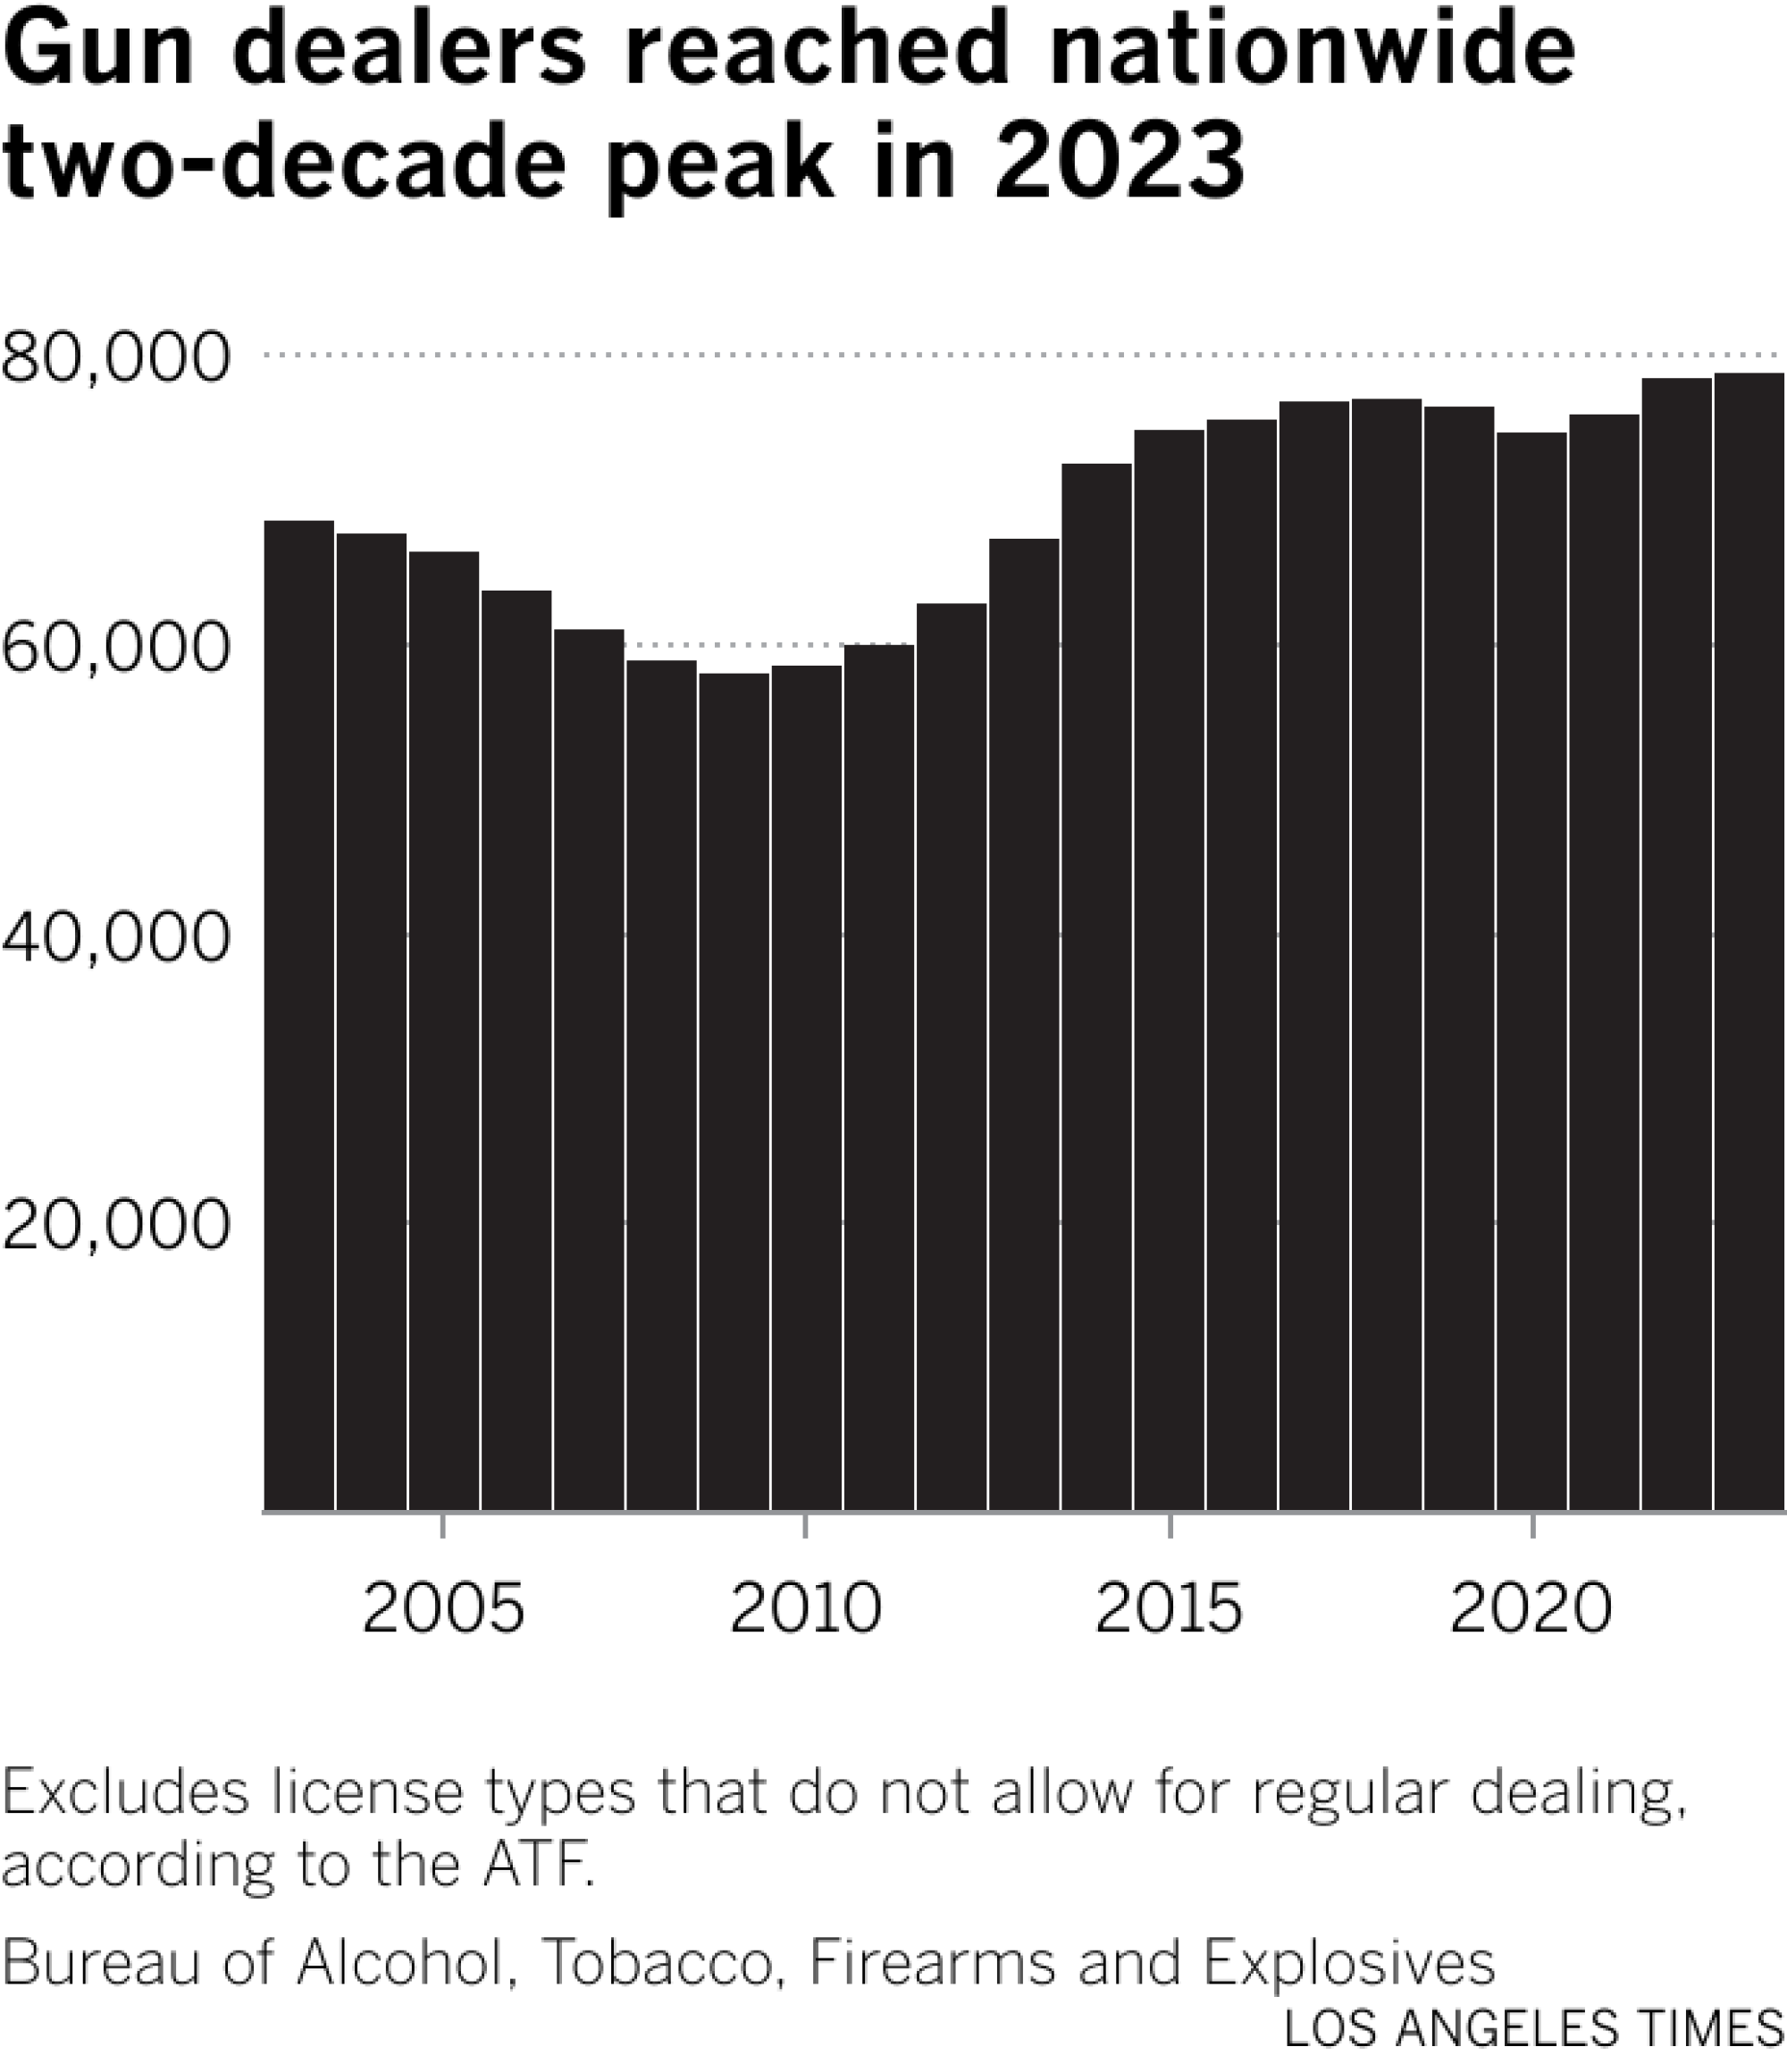 A column chart showing the number of gun dealers at the beginning of each year from 2003 to 2023. 2003 began with around 69 thousand and 2023 began with nearly 79 thousand.